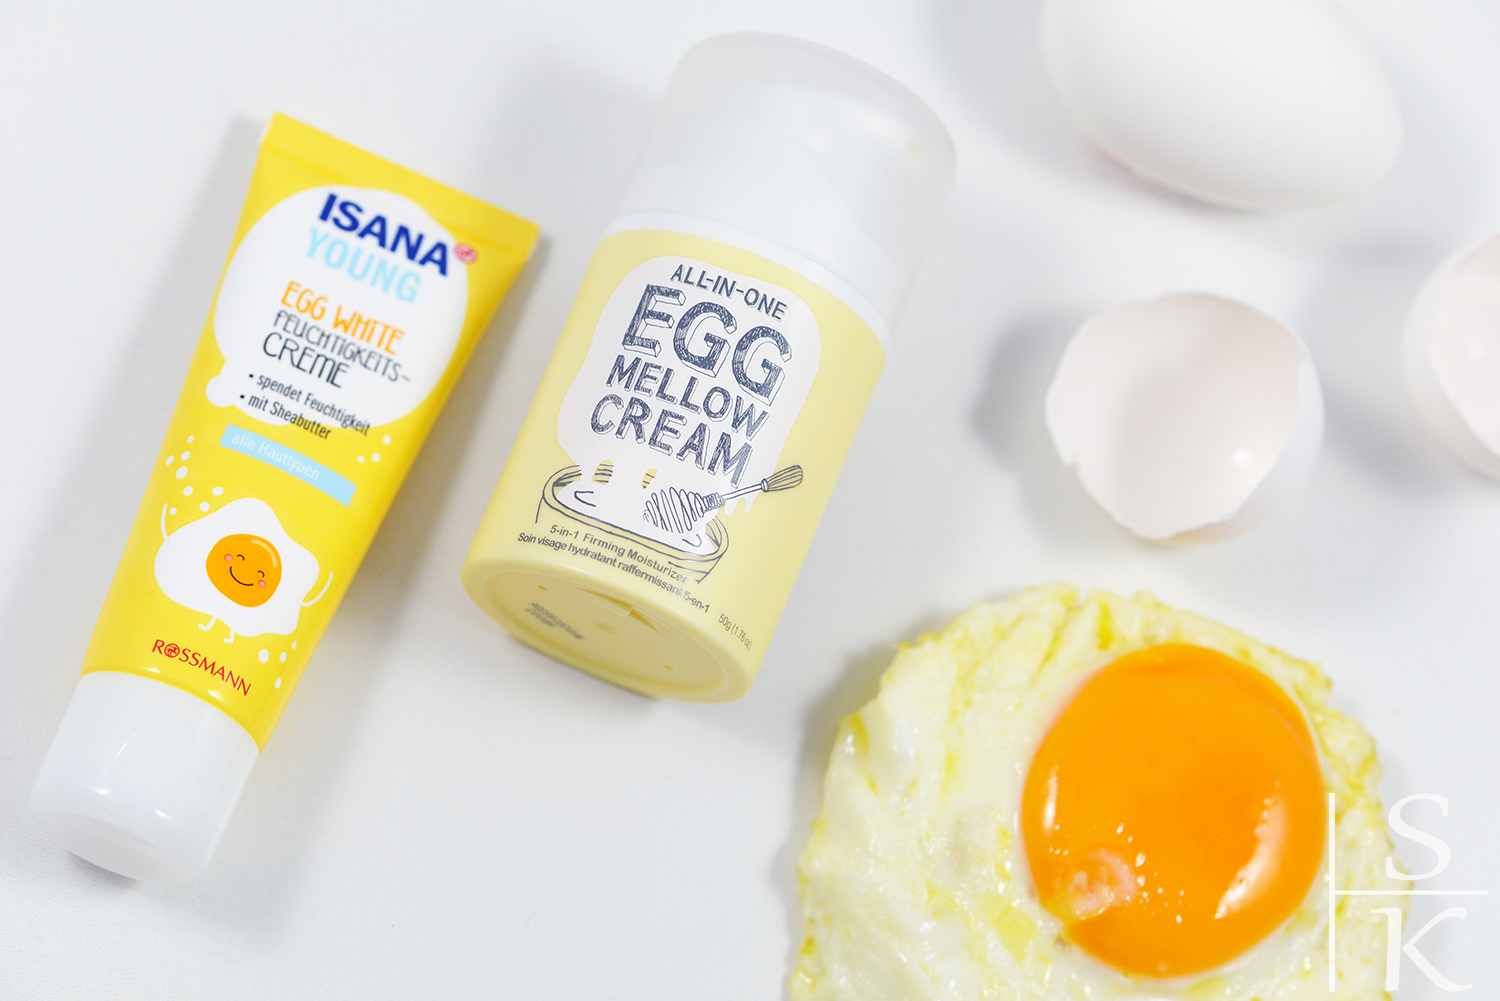 Too Cool For School Egg Mellow Cream vs. Isana Young Egg White Feuchtigkeitscreme Review Horizont-Blog